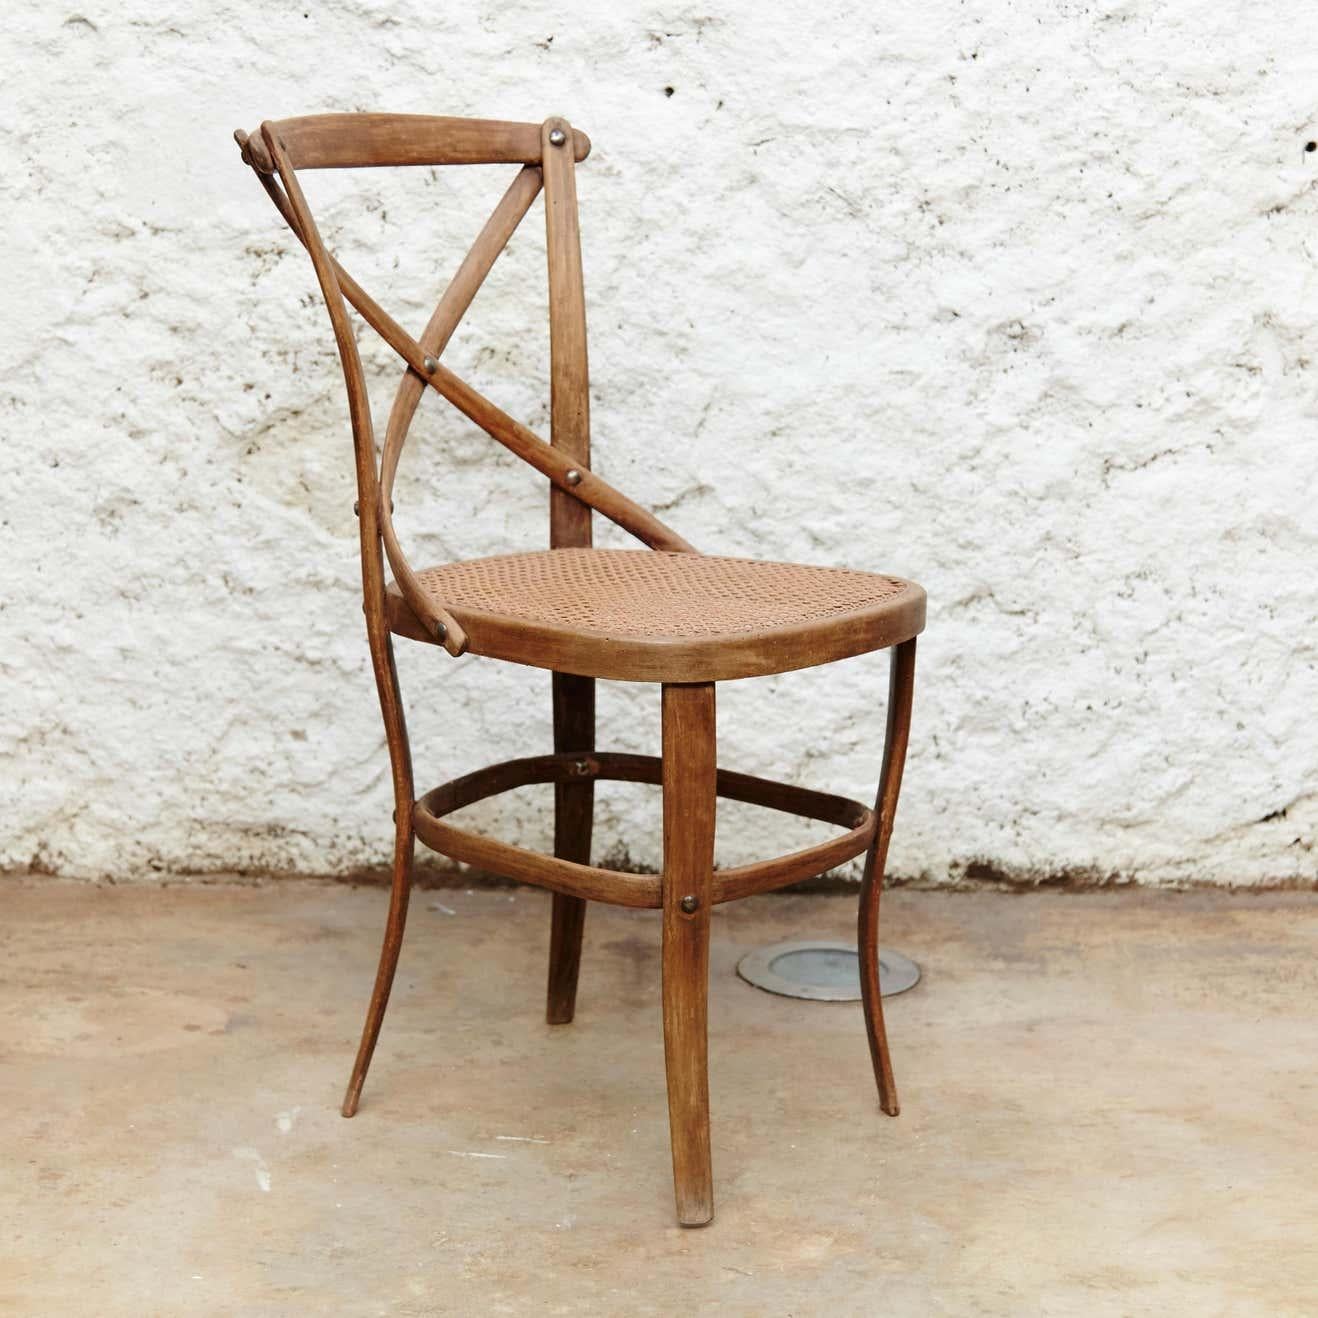 Thonet chair model number 91, manufactured by Thonet, circa 1920. 
Designed by August Thonet.

It preserves the original label to the underside. 

In original condition, with minor wear consistent with age and use, preserving a beautiful